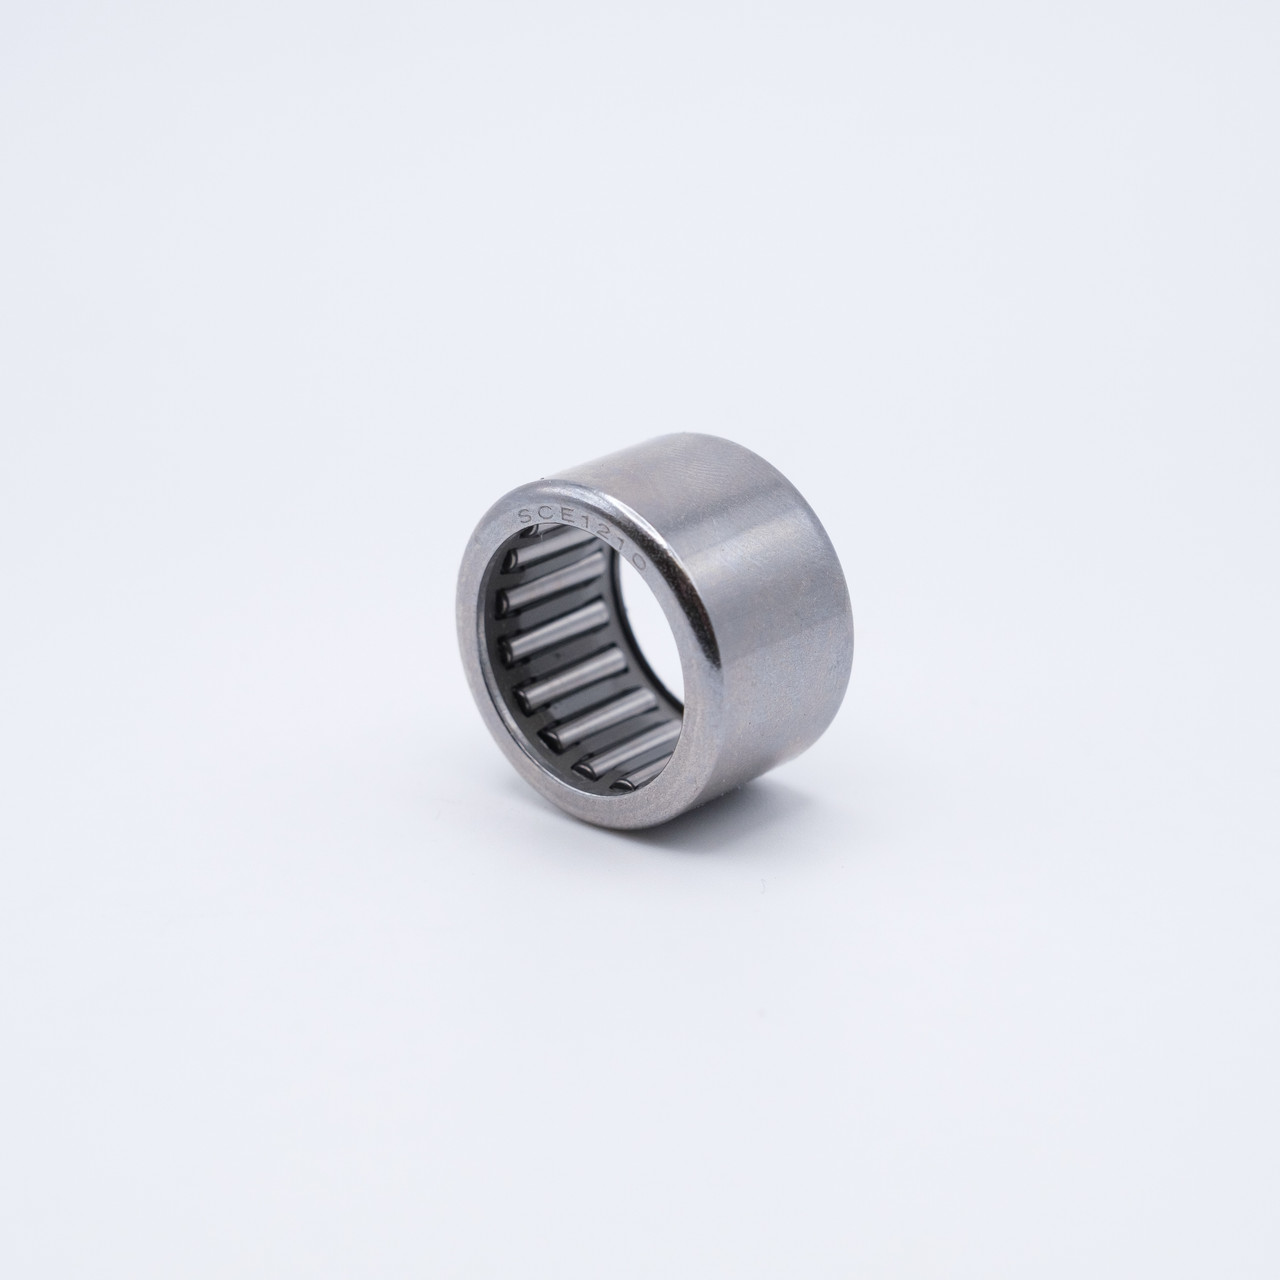 J-268 Needle Roller Bearing 1-5/8x2x1/2 Inches IKO Side View